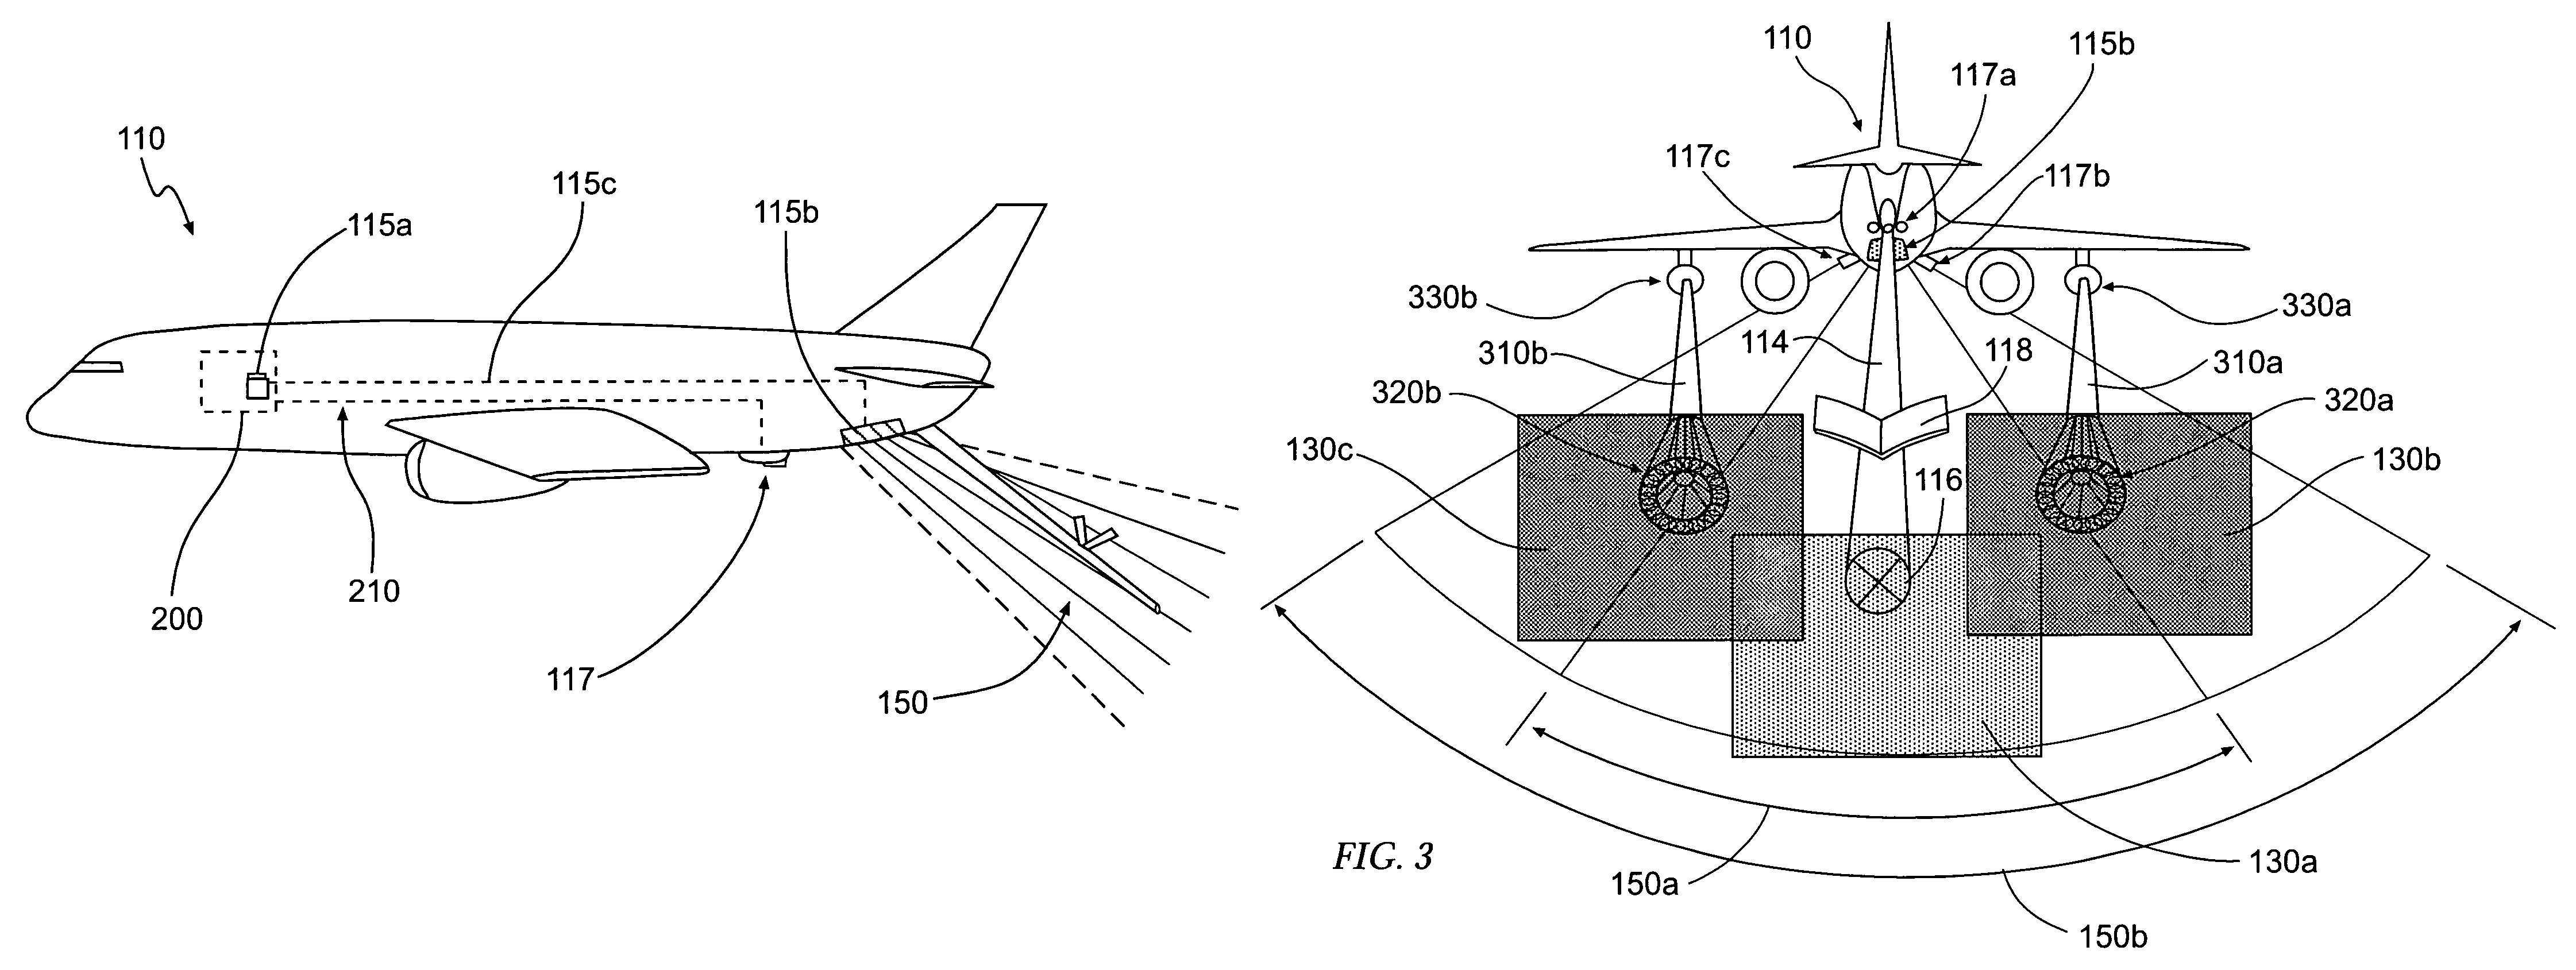 Illuminating system, device, and method for in-flight refueling